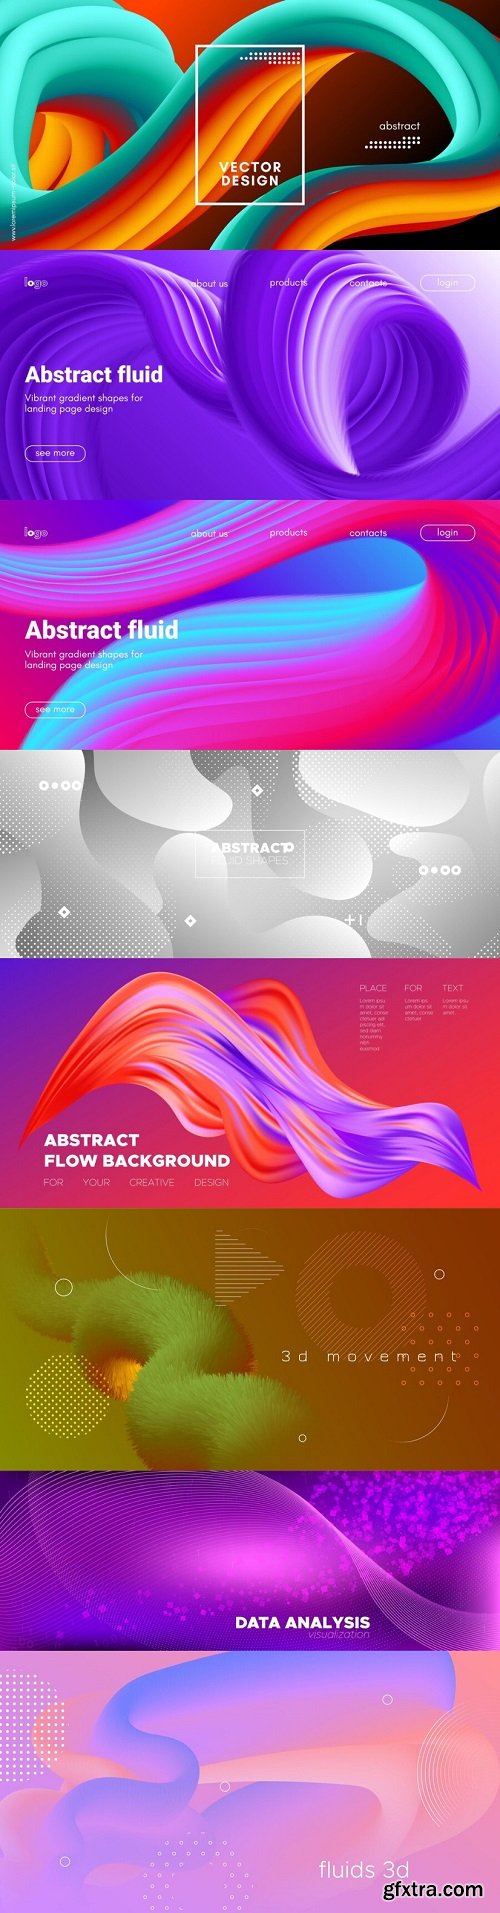 Dynamic backgrounds with abstract 3d fluid & wave shapes